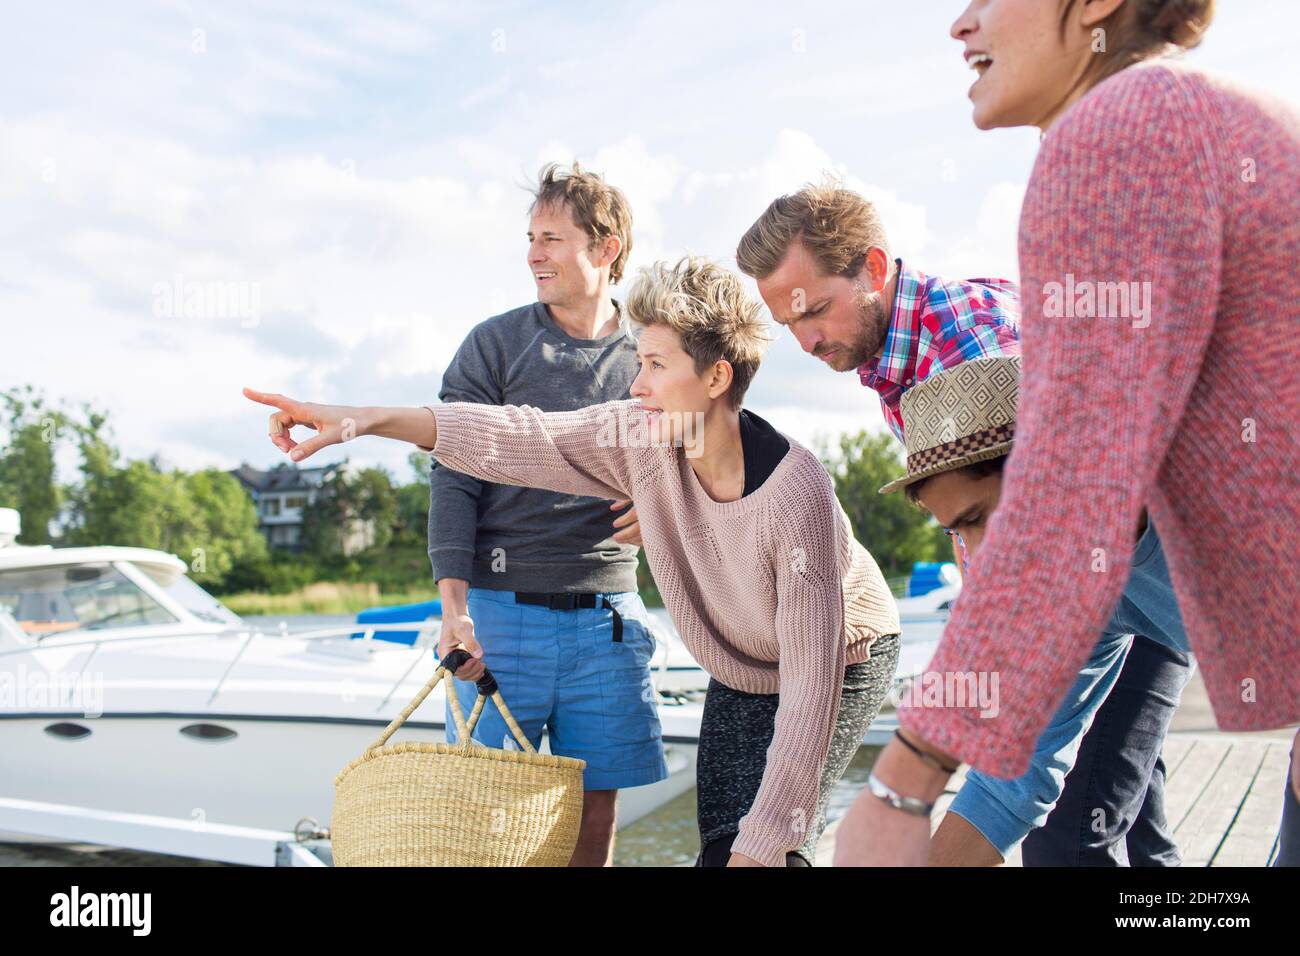 Woman showing something to friends while preparing for picnic at harbor Stock Photo